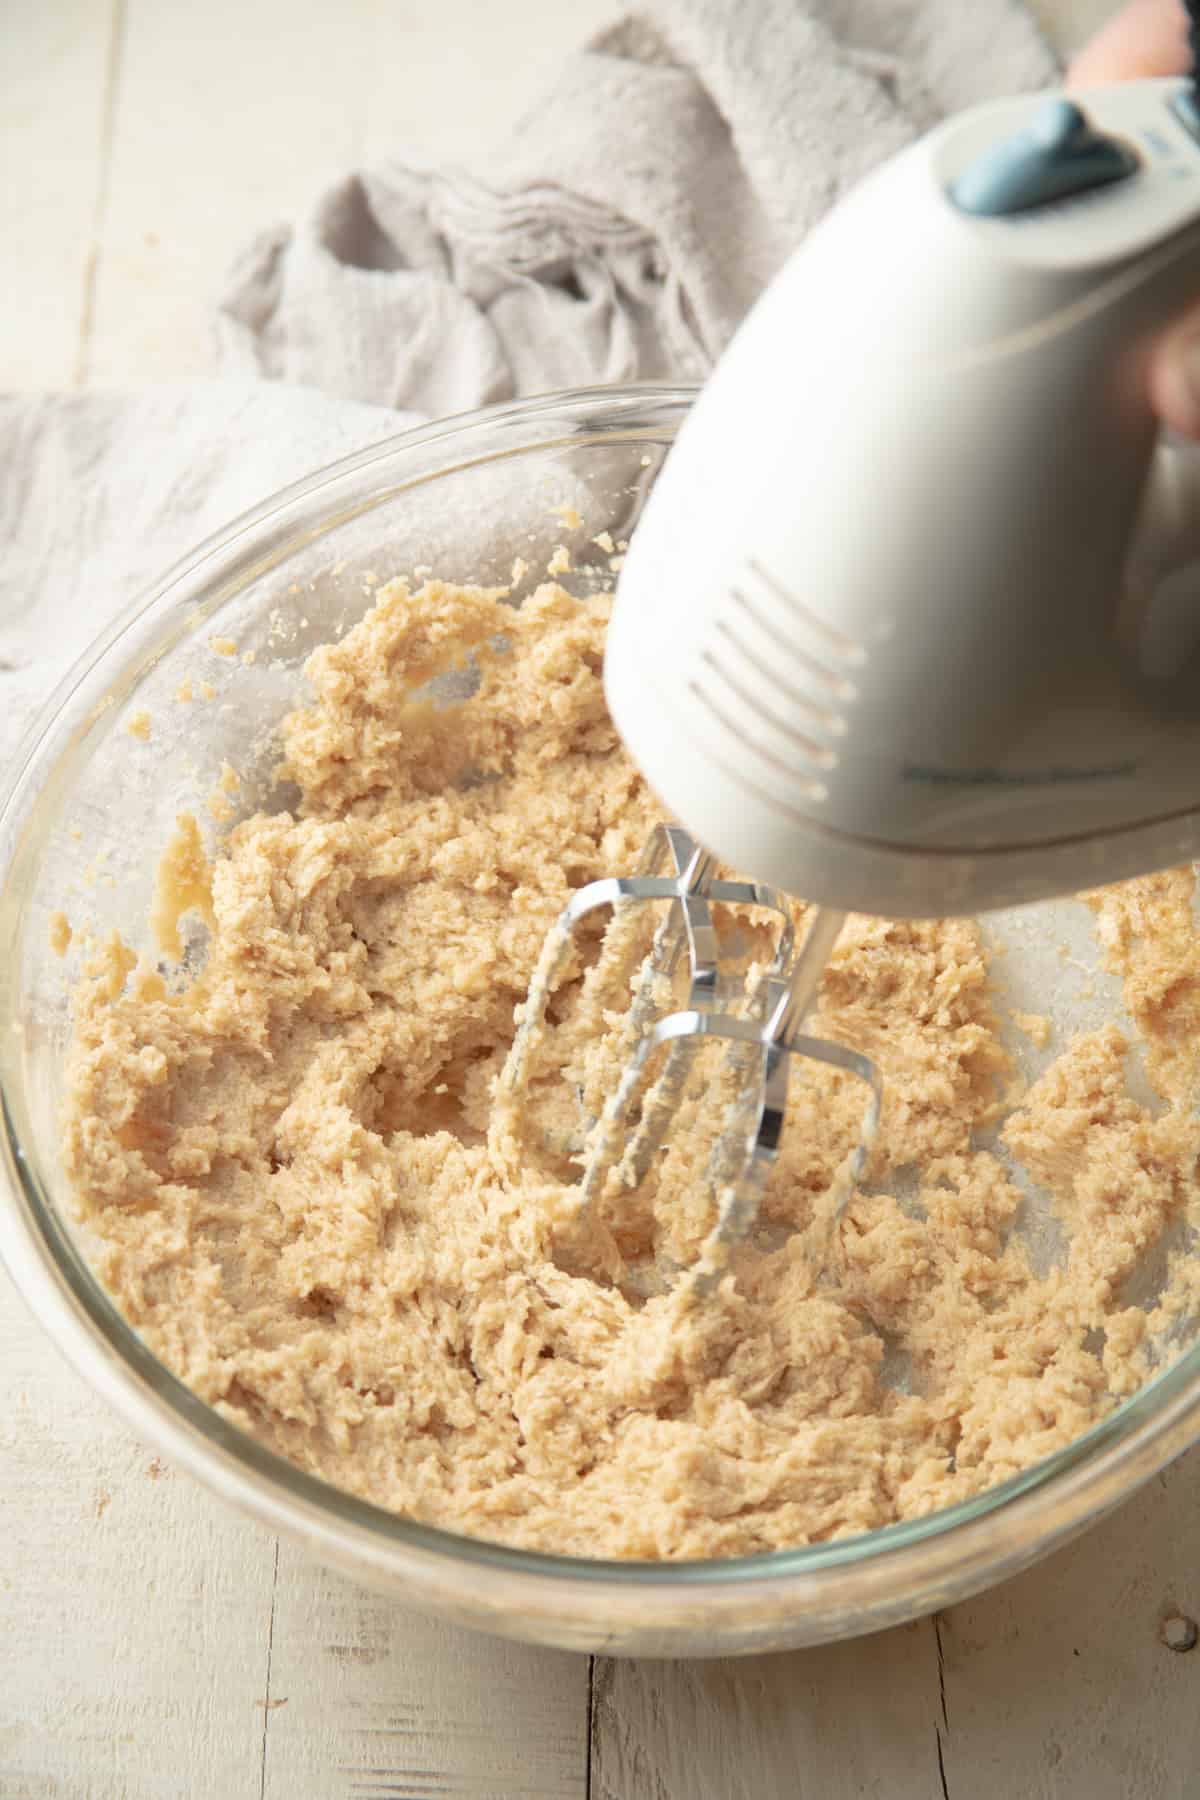 Electric mixer beating butter and sugars in a mixing bowl.